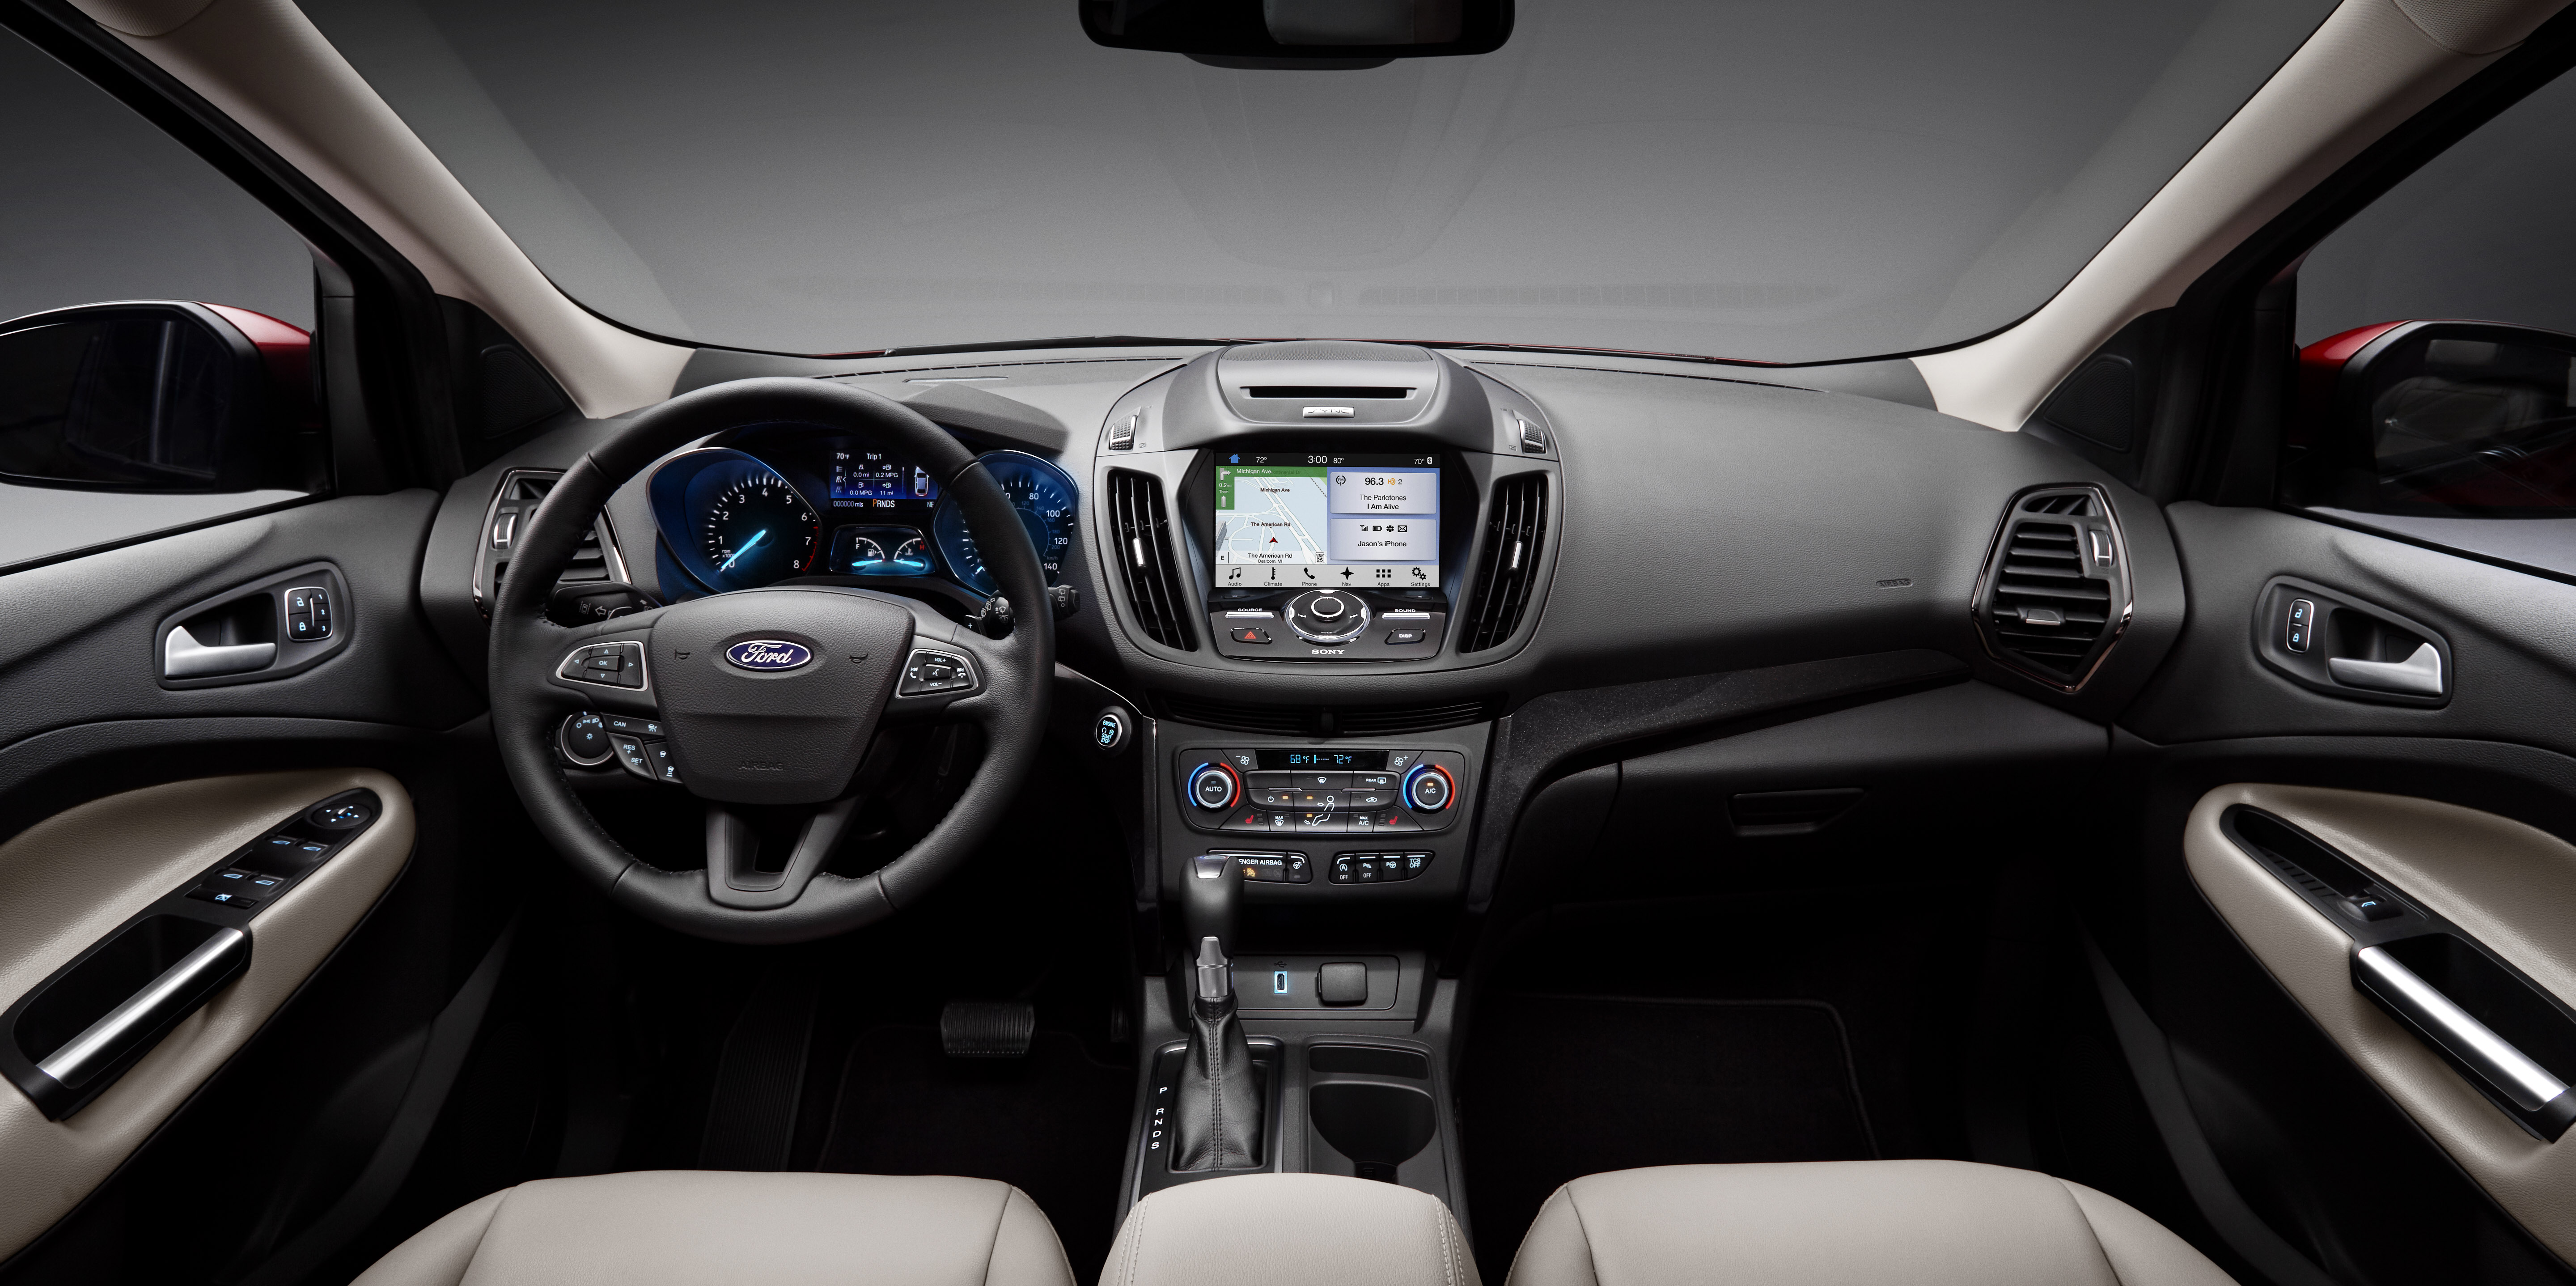 Ford Launching Technology-Packed New Escape; More Connectivity, Innovative  Features Make Driving Safer, Easier | Ford Media Center